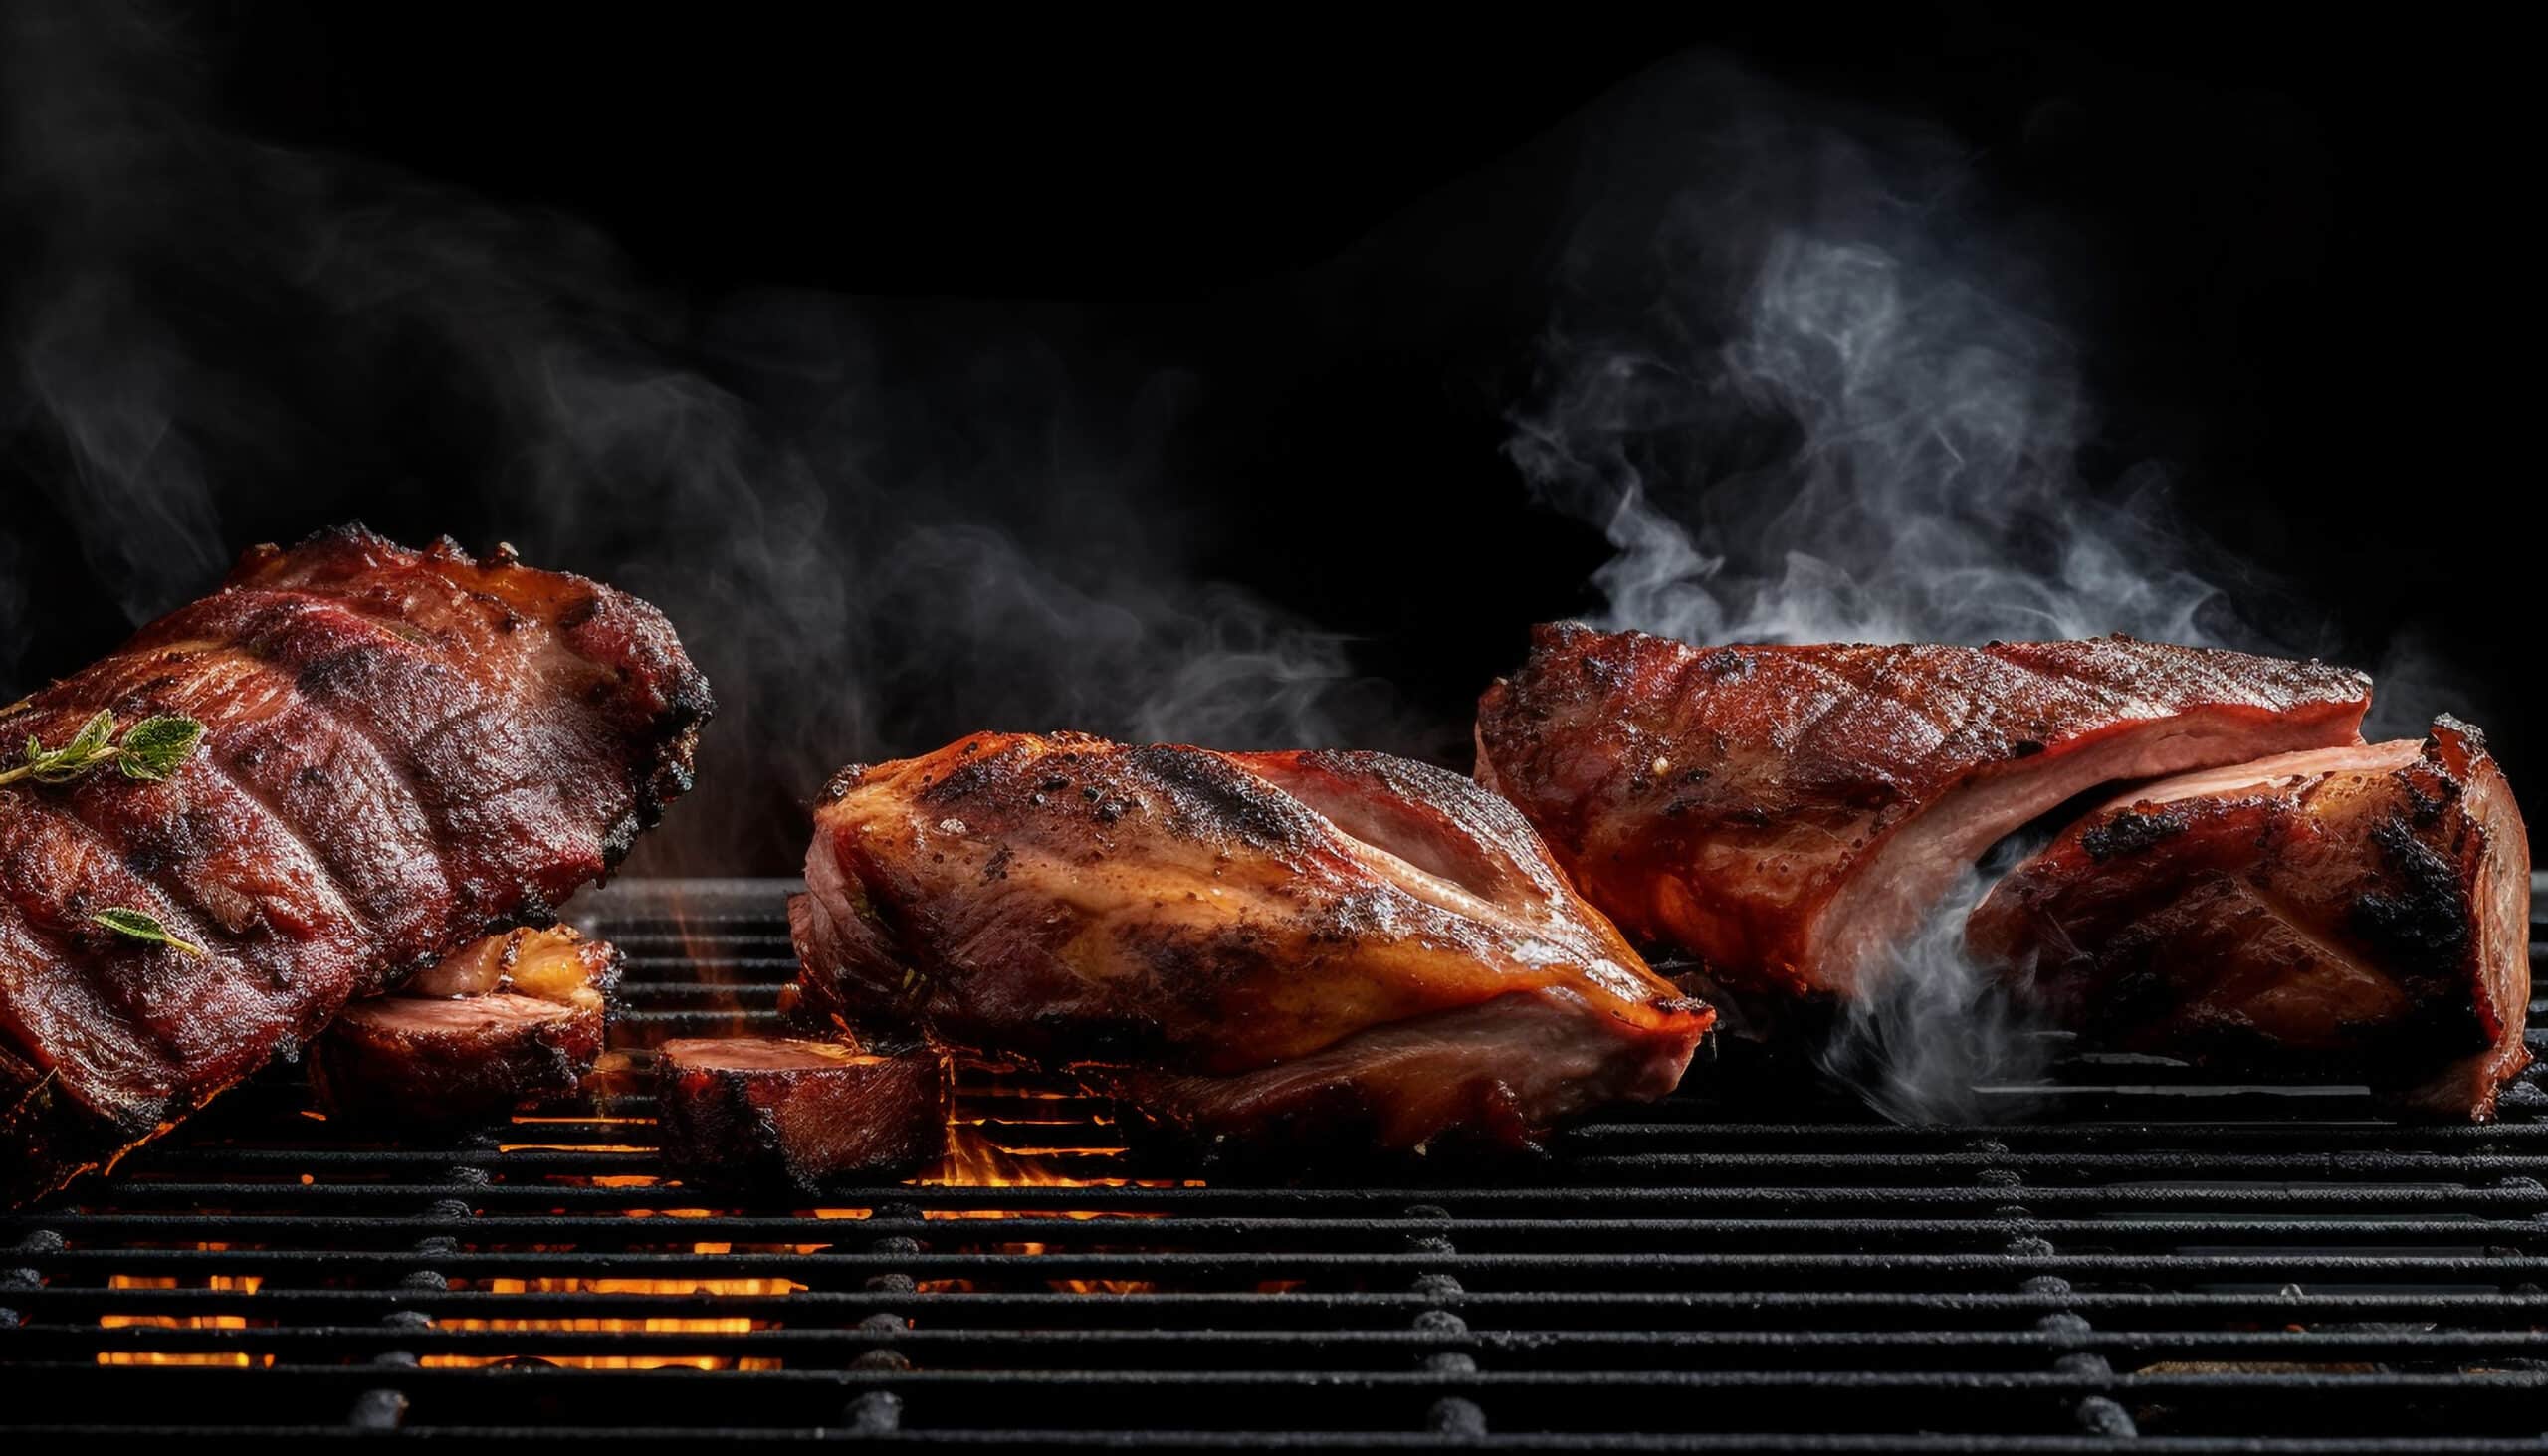 www.appr.com : How To Get Smoke Flavor On Gas Grill?